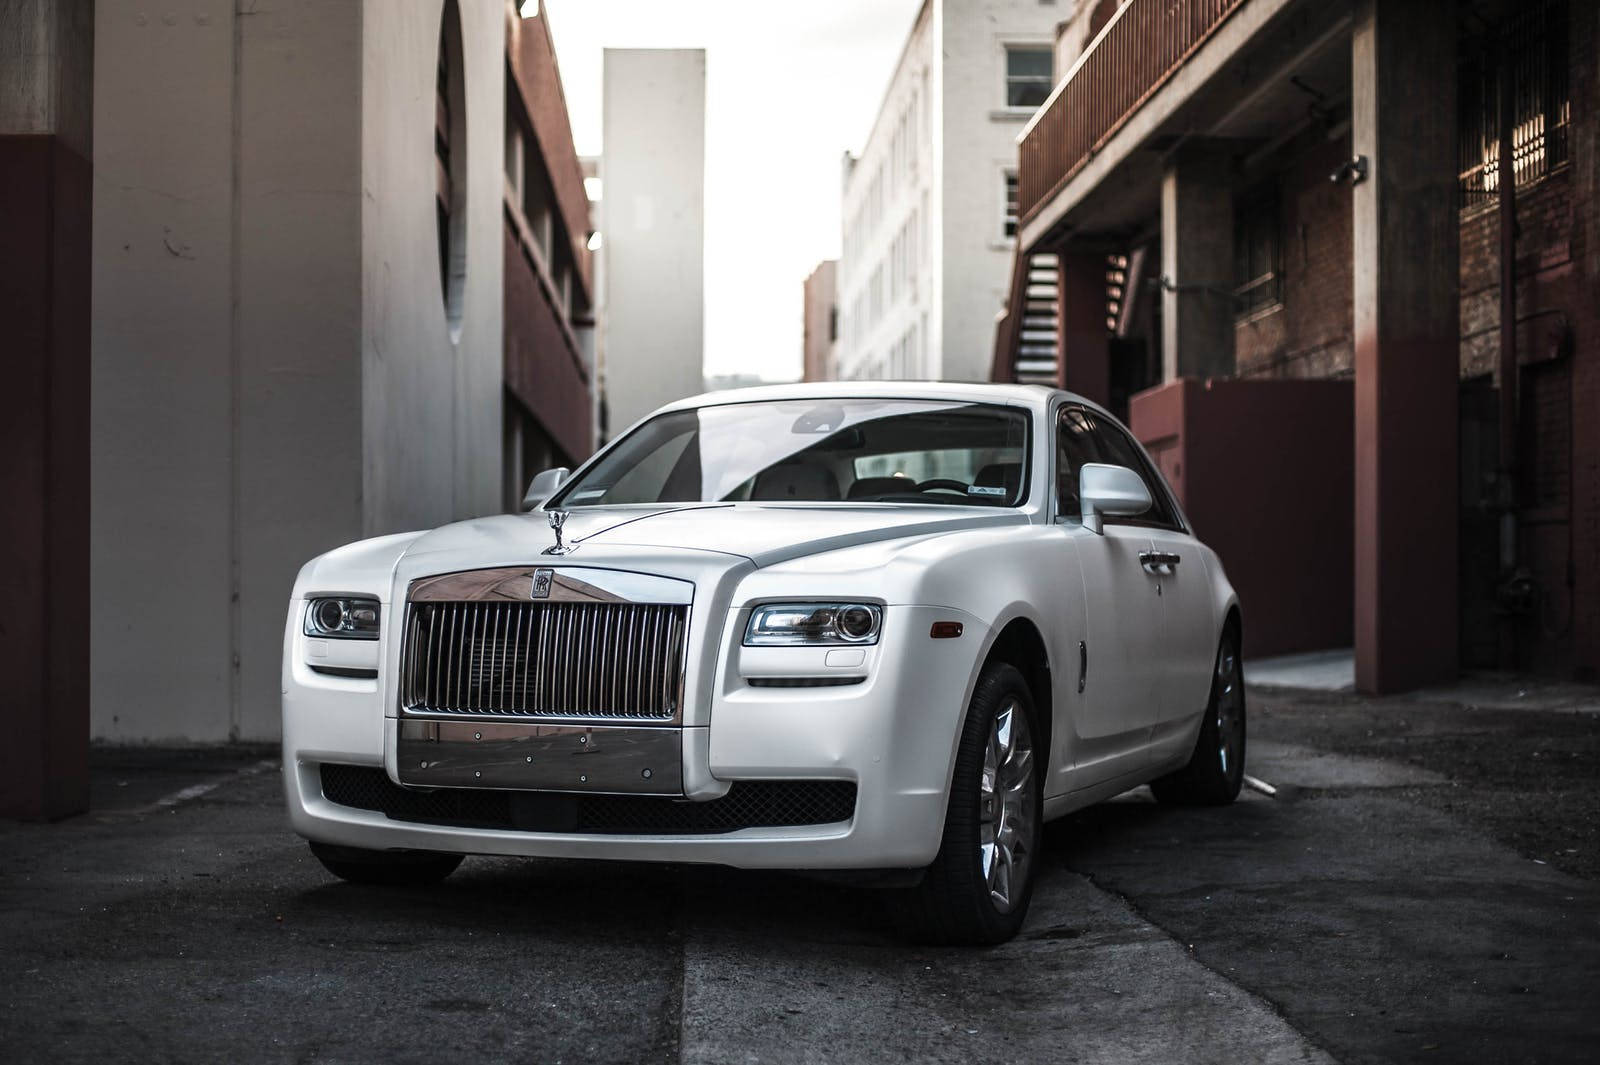 A Vision Of Prestige - White Ghost Luxury Car In An Alley Background